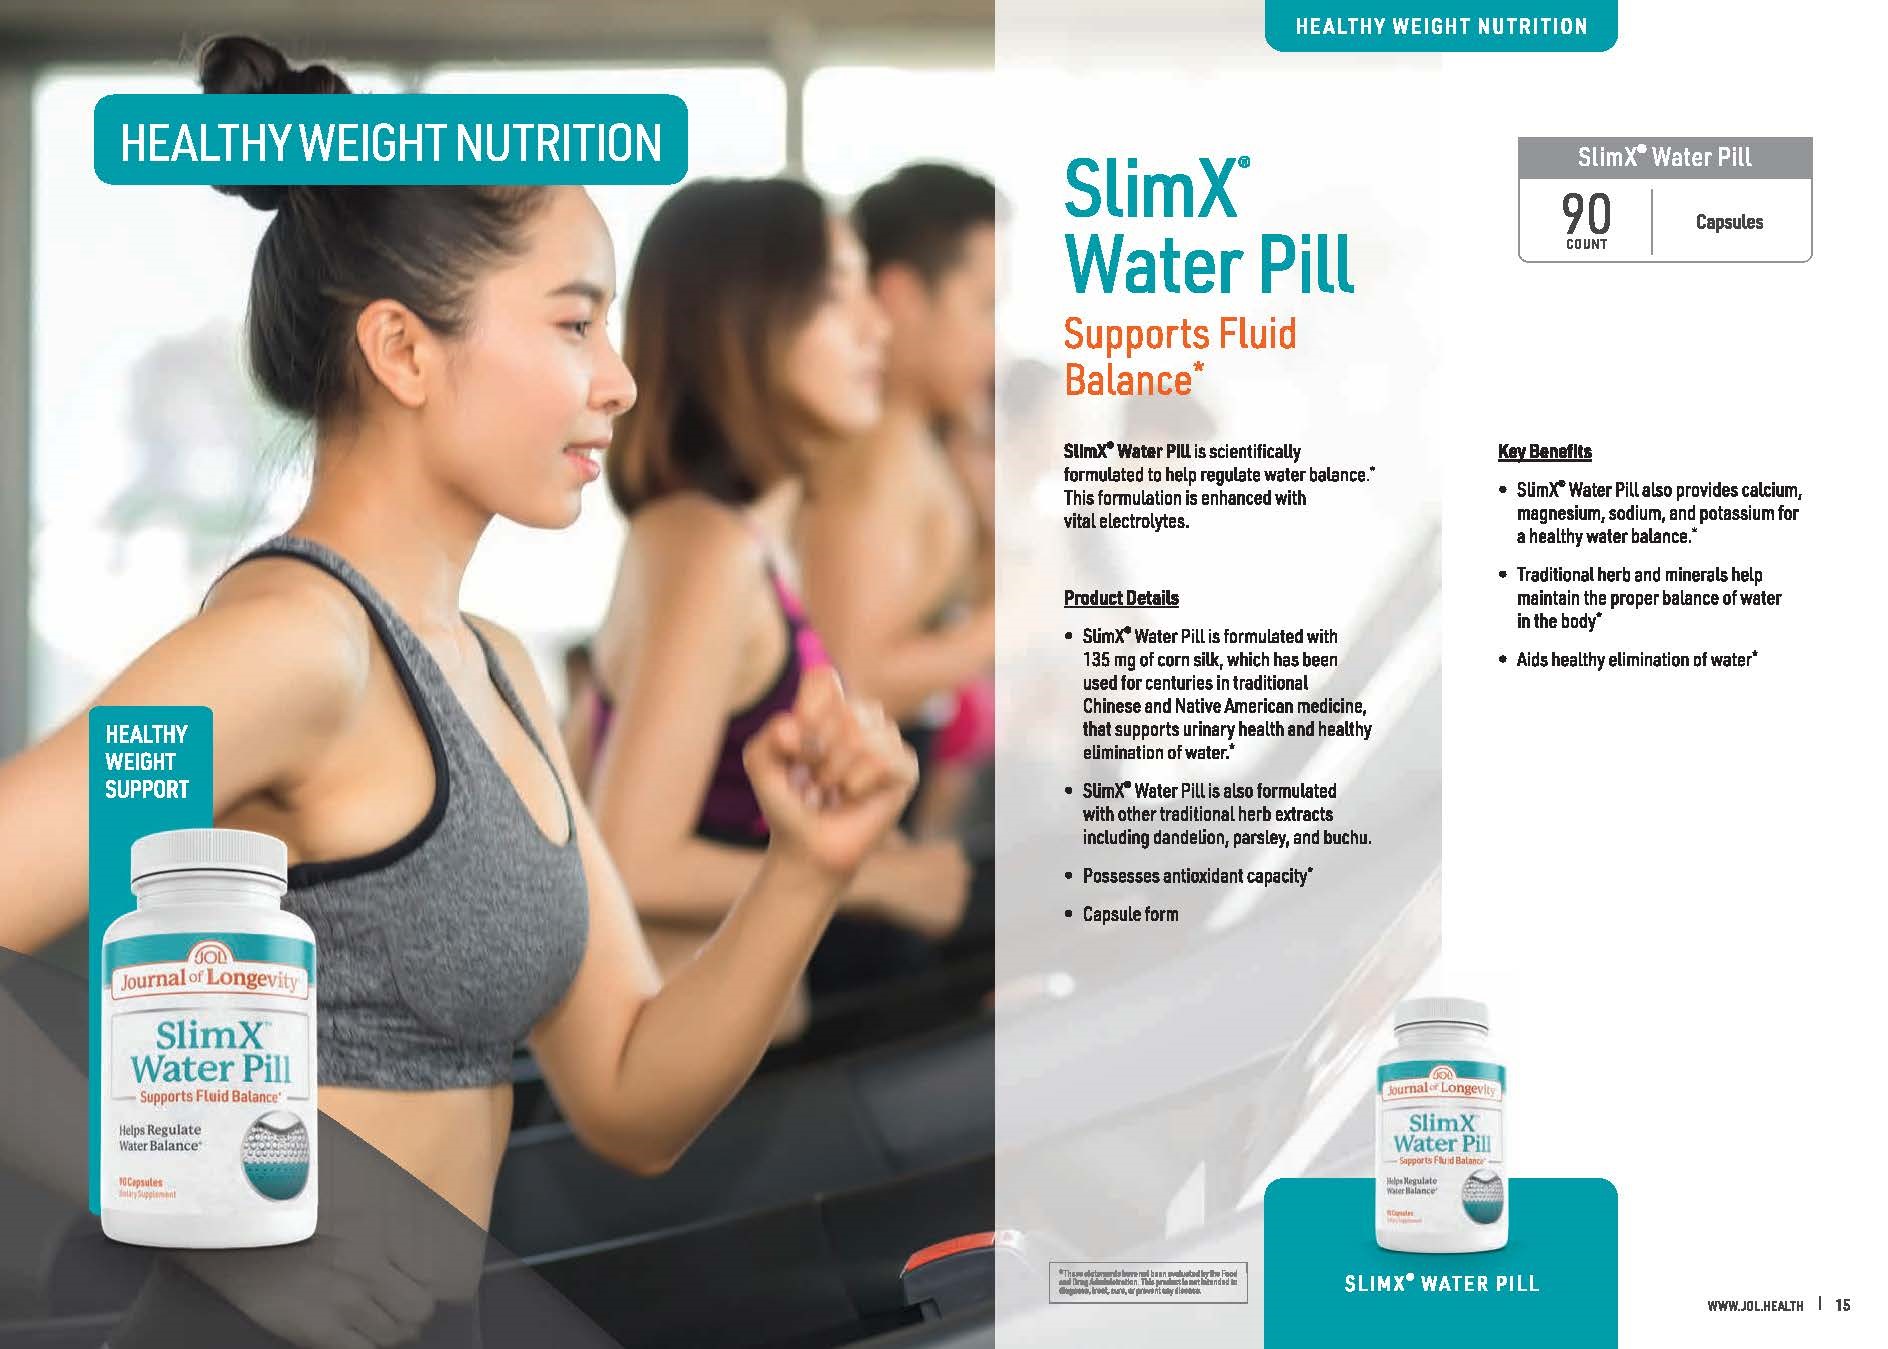 Journal of Longevity Slim X Water Pill Capsule Vitamin to Support Healthy Elimination of Water